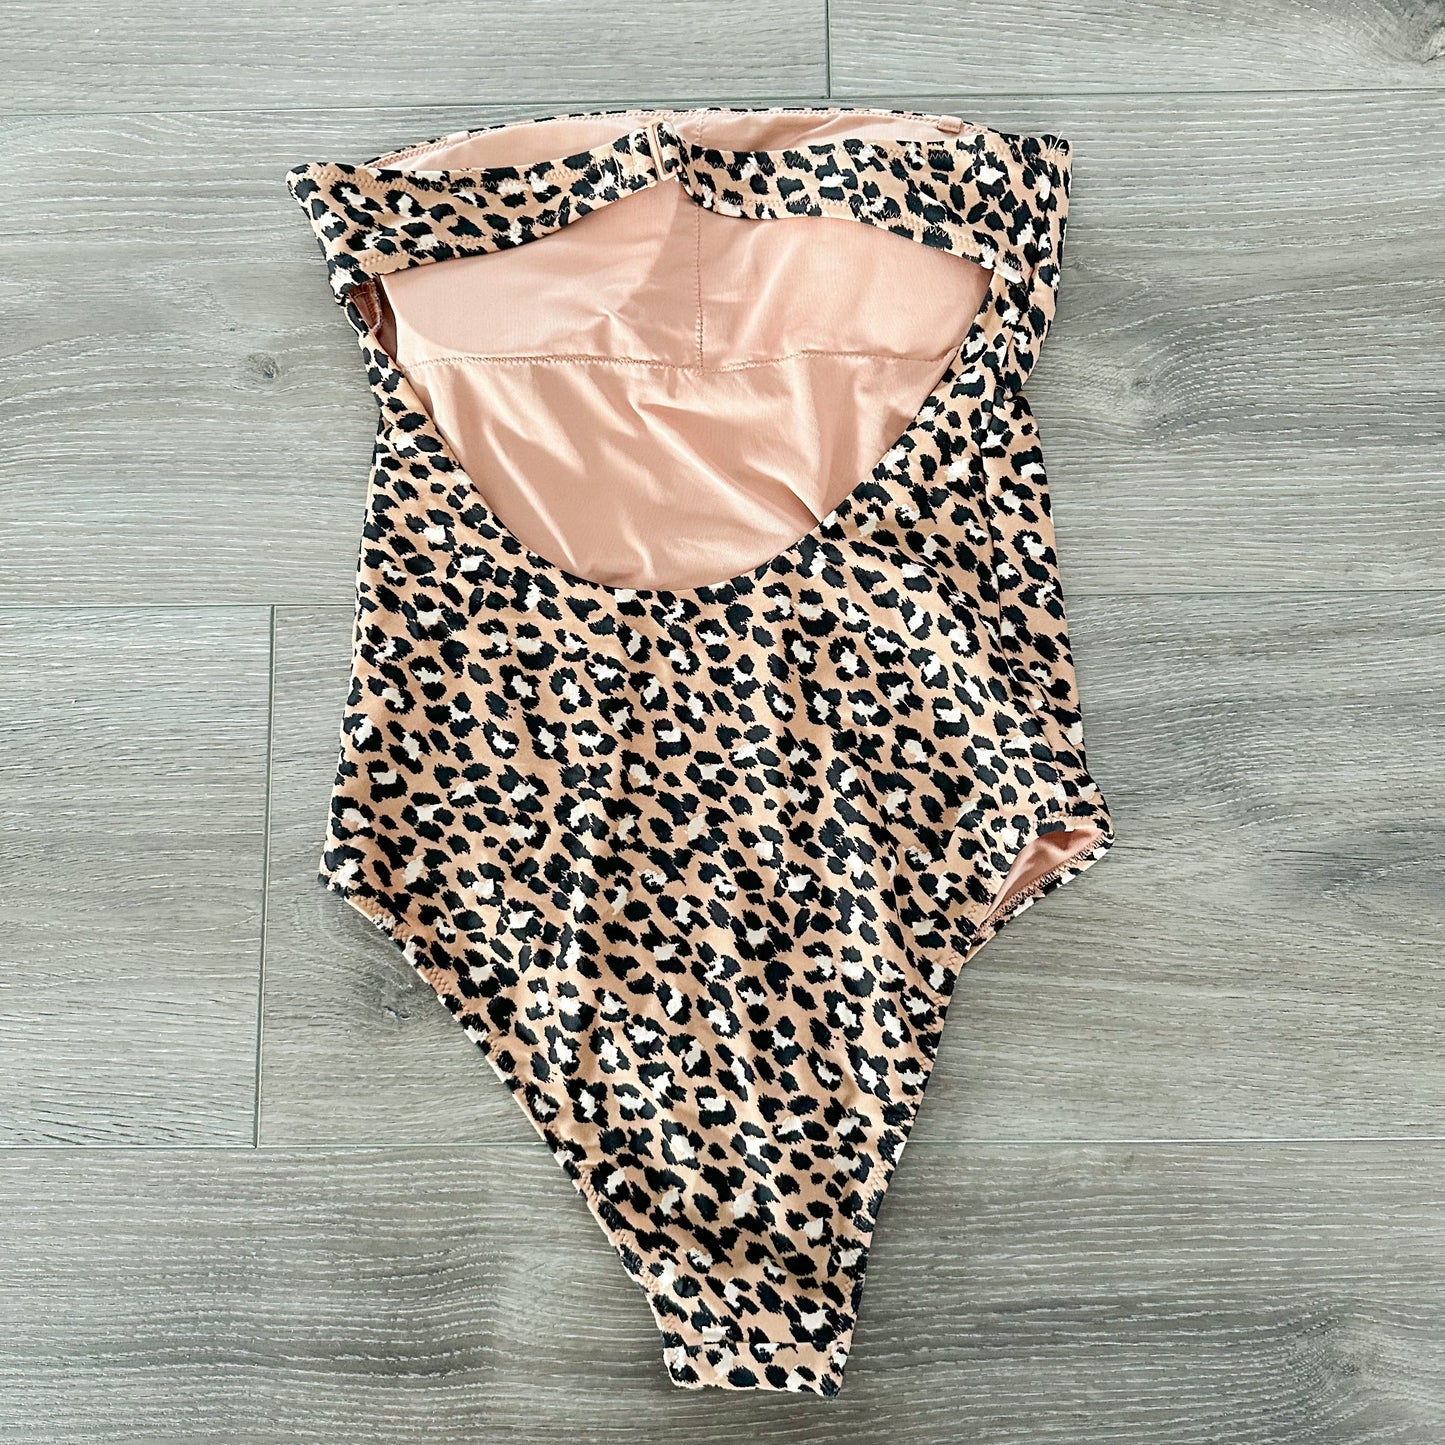 Aerie Strapless One Piece Swimsuit Leopard Print Size Small